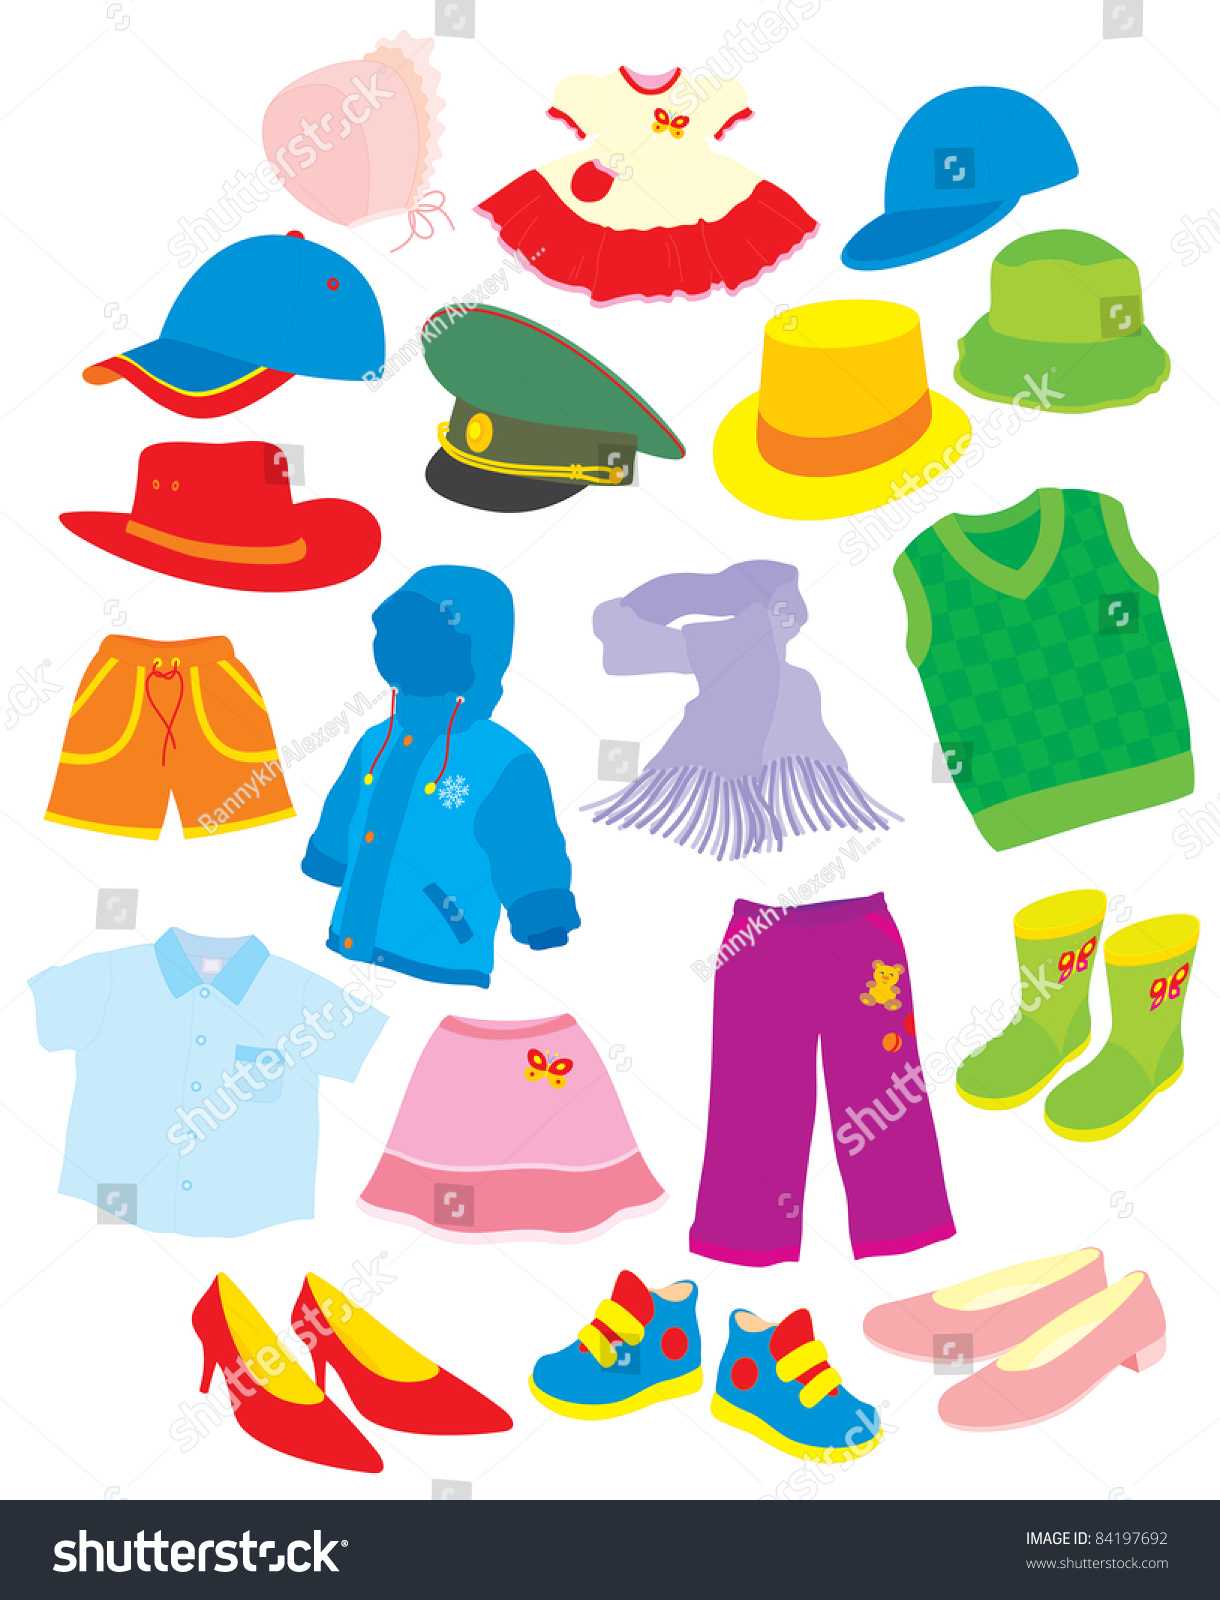 Footwear And Clothes Stock Vector Illustration 84197692 : Shutterstock